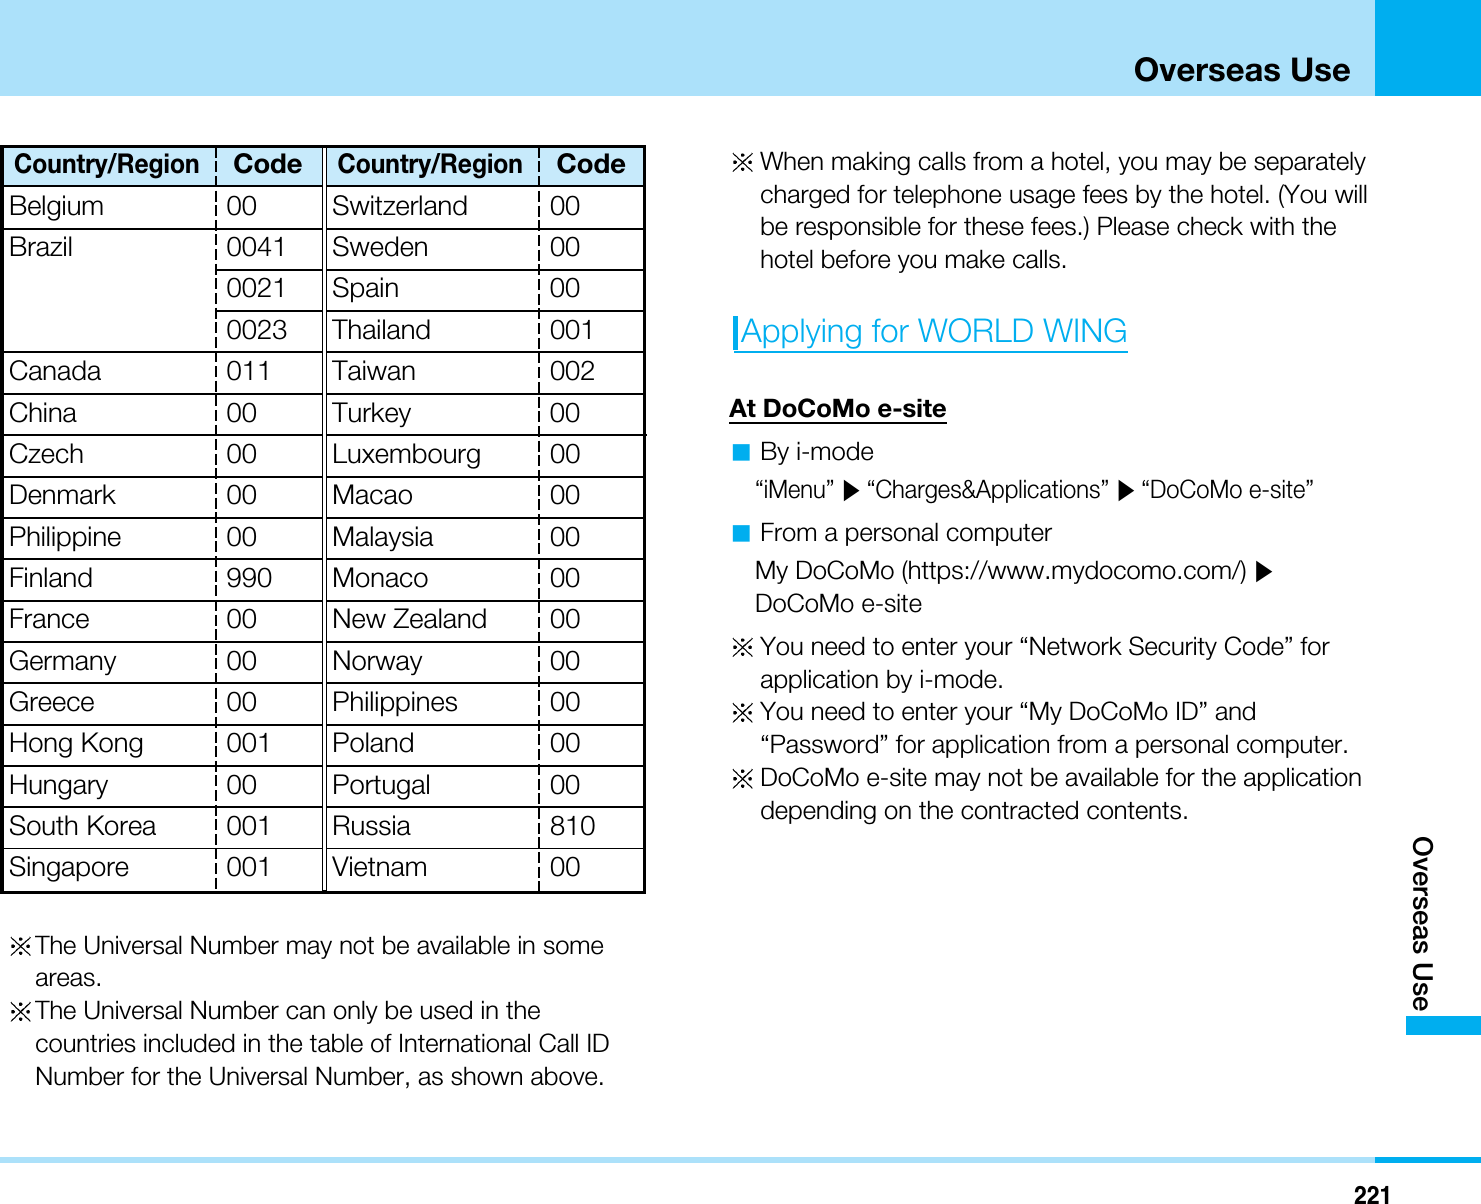 221Overseas UseOverseas UseThe Universal Number may not be available in someareas.The Universal Number can only be used in thecountries included in the table of International Call IDNumber for the Universal Number, as shown above.When making calls from a hotel, you may be separatelycharged for telephone usage fees by the hotel. (You willbe responsible for these fees.) Please check with thehotel before you make calls.Applying for WORLD WINGAt DoCoMo e-siteaBy i-mode“iMenu” ]“Charges&amp;Applications” ]“DoCoMo e-site”aFrom a personal computerMy DoCoMo (https://www.mydocomo.com/)]DoCoMo e-siteYou need to enter your “Network Security Code” forapplication by i-mode.You need to enter your “My DoCoMo ID” and“Password” for application from a personal computer.DoCoMo e-site may not be available for the applicationdepending on the contracted contents.Country/RegionCodeBelgium 00Brazil 004100210023Country/RegionCodeSwitzerland 00Sweden 00Spain 00ThailandTaiwanTurkey001Canada 011 002China 00 00Czech 00 Luxembourg 00Denmark 00 Macao 0000 Malaysia 00990 Monaco 00France 00 New Zealand 00Germany 00 Norway 00Greece 00 Philippines 00Hong Kong 001 Poland 00HungarySouth Korea00001Portugal 00Russia 810Singapore 001 Vietnam 00PhilippineFinland